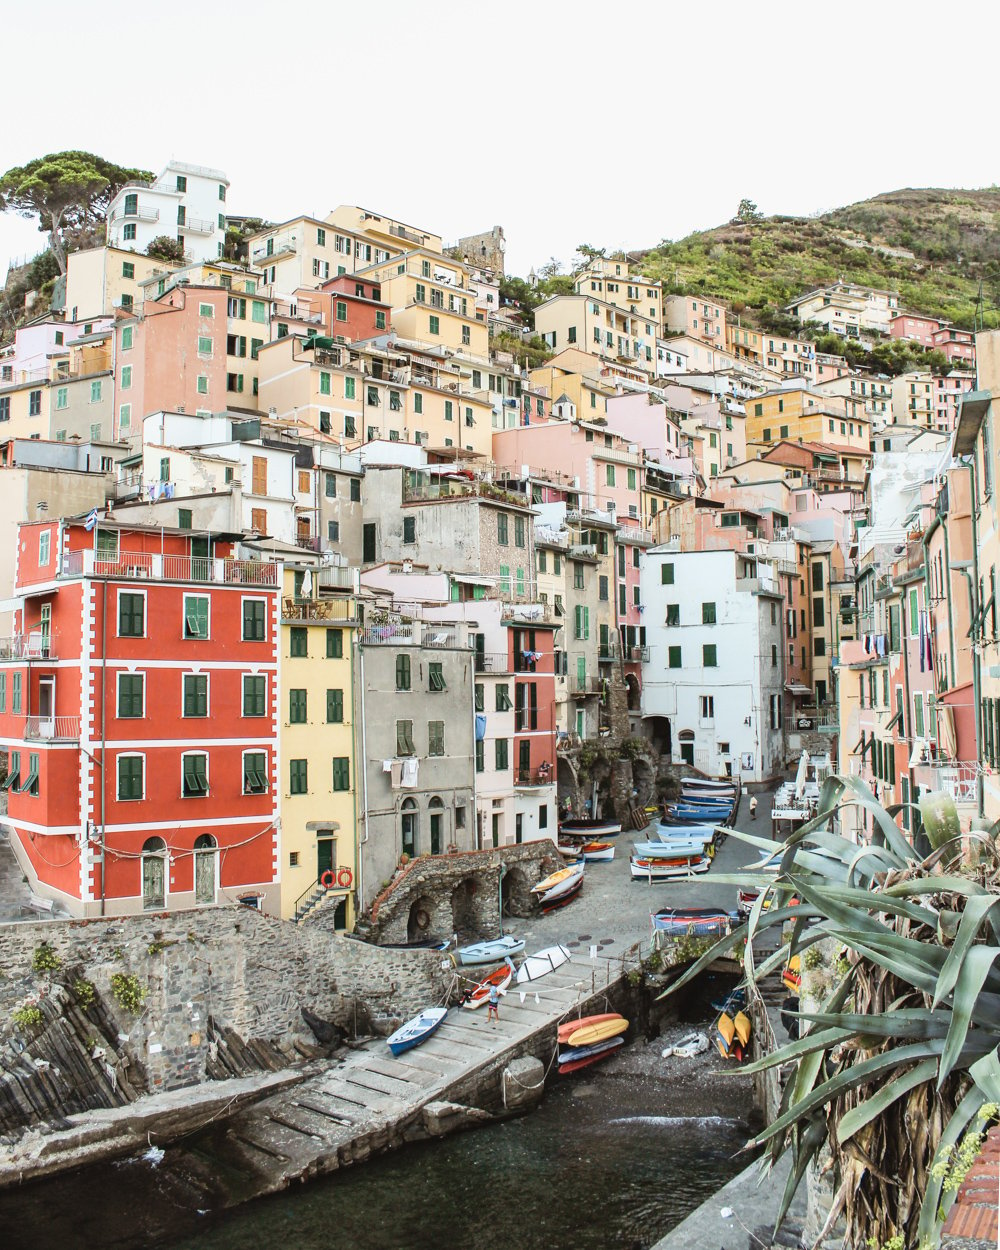 How to See Cinque Terre in Two Days